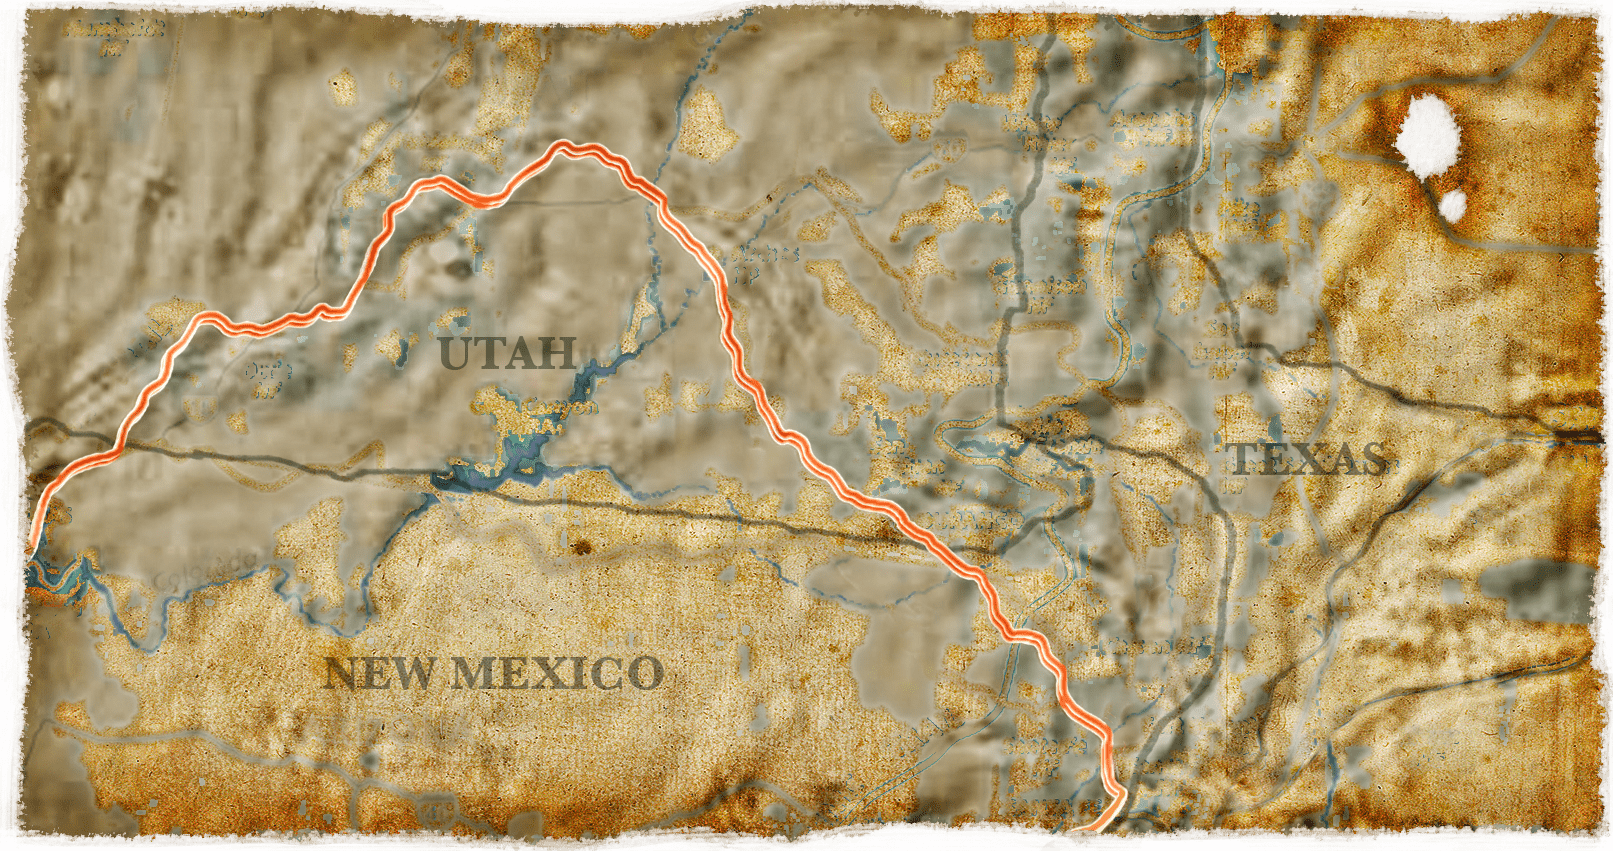 Old map, Film Score In Reverse Series entertains audiences with Spanish Trail, enhancing a live musical performance with videos and images of the west.